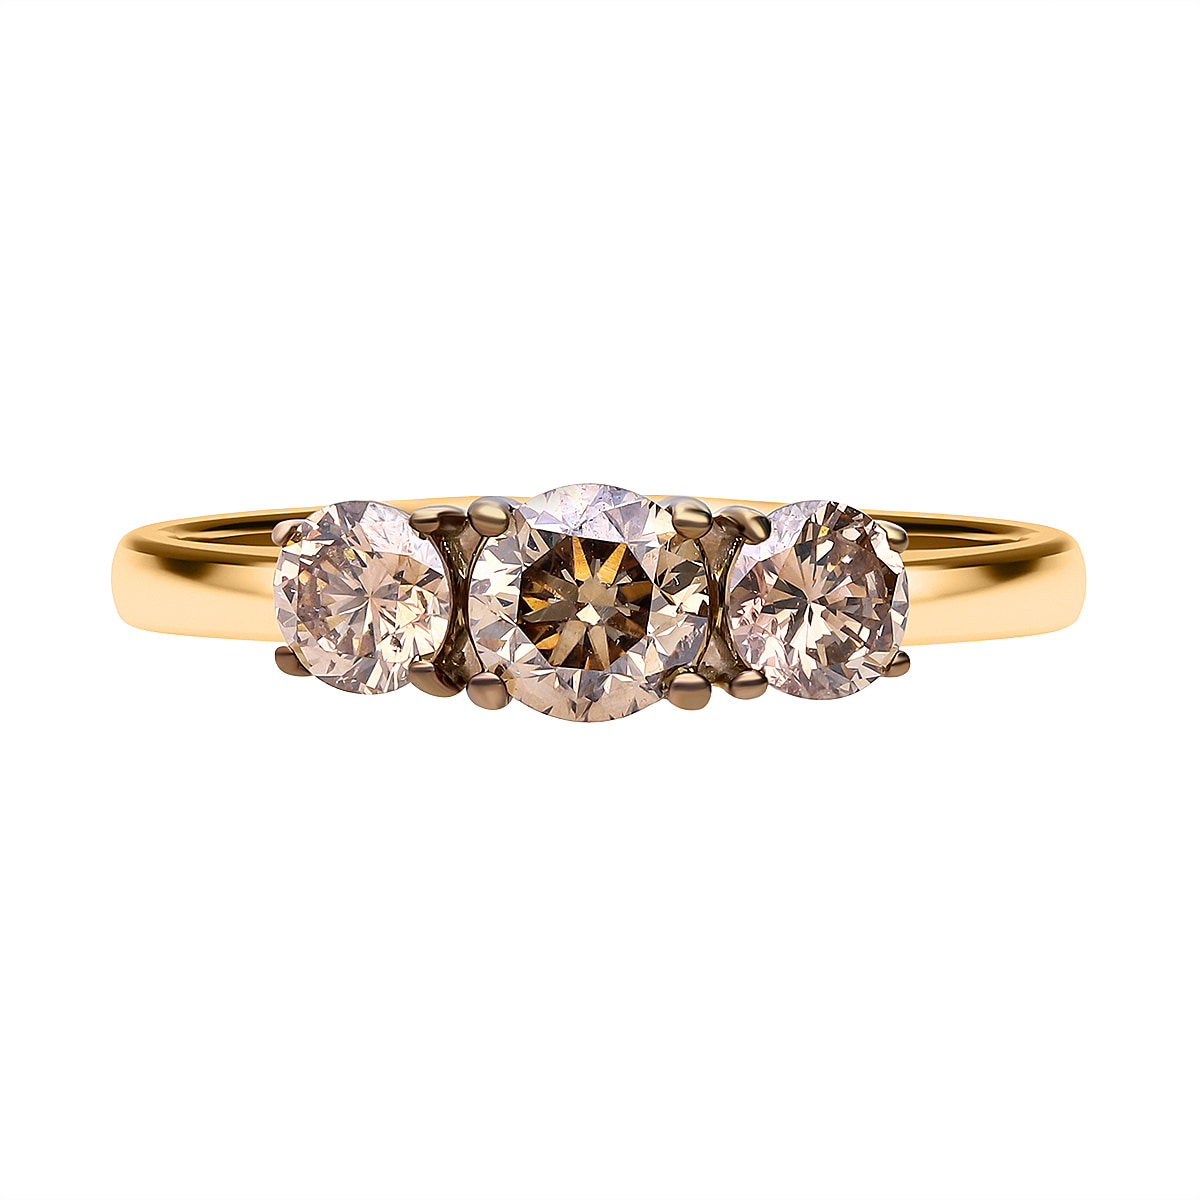 One Time Deal - 1 Carat Natural Champagne Diamond (0.50 Ct Center) Trilogy SGL Certified Ring in 9K Yellow Gold